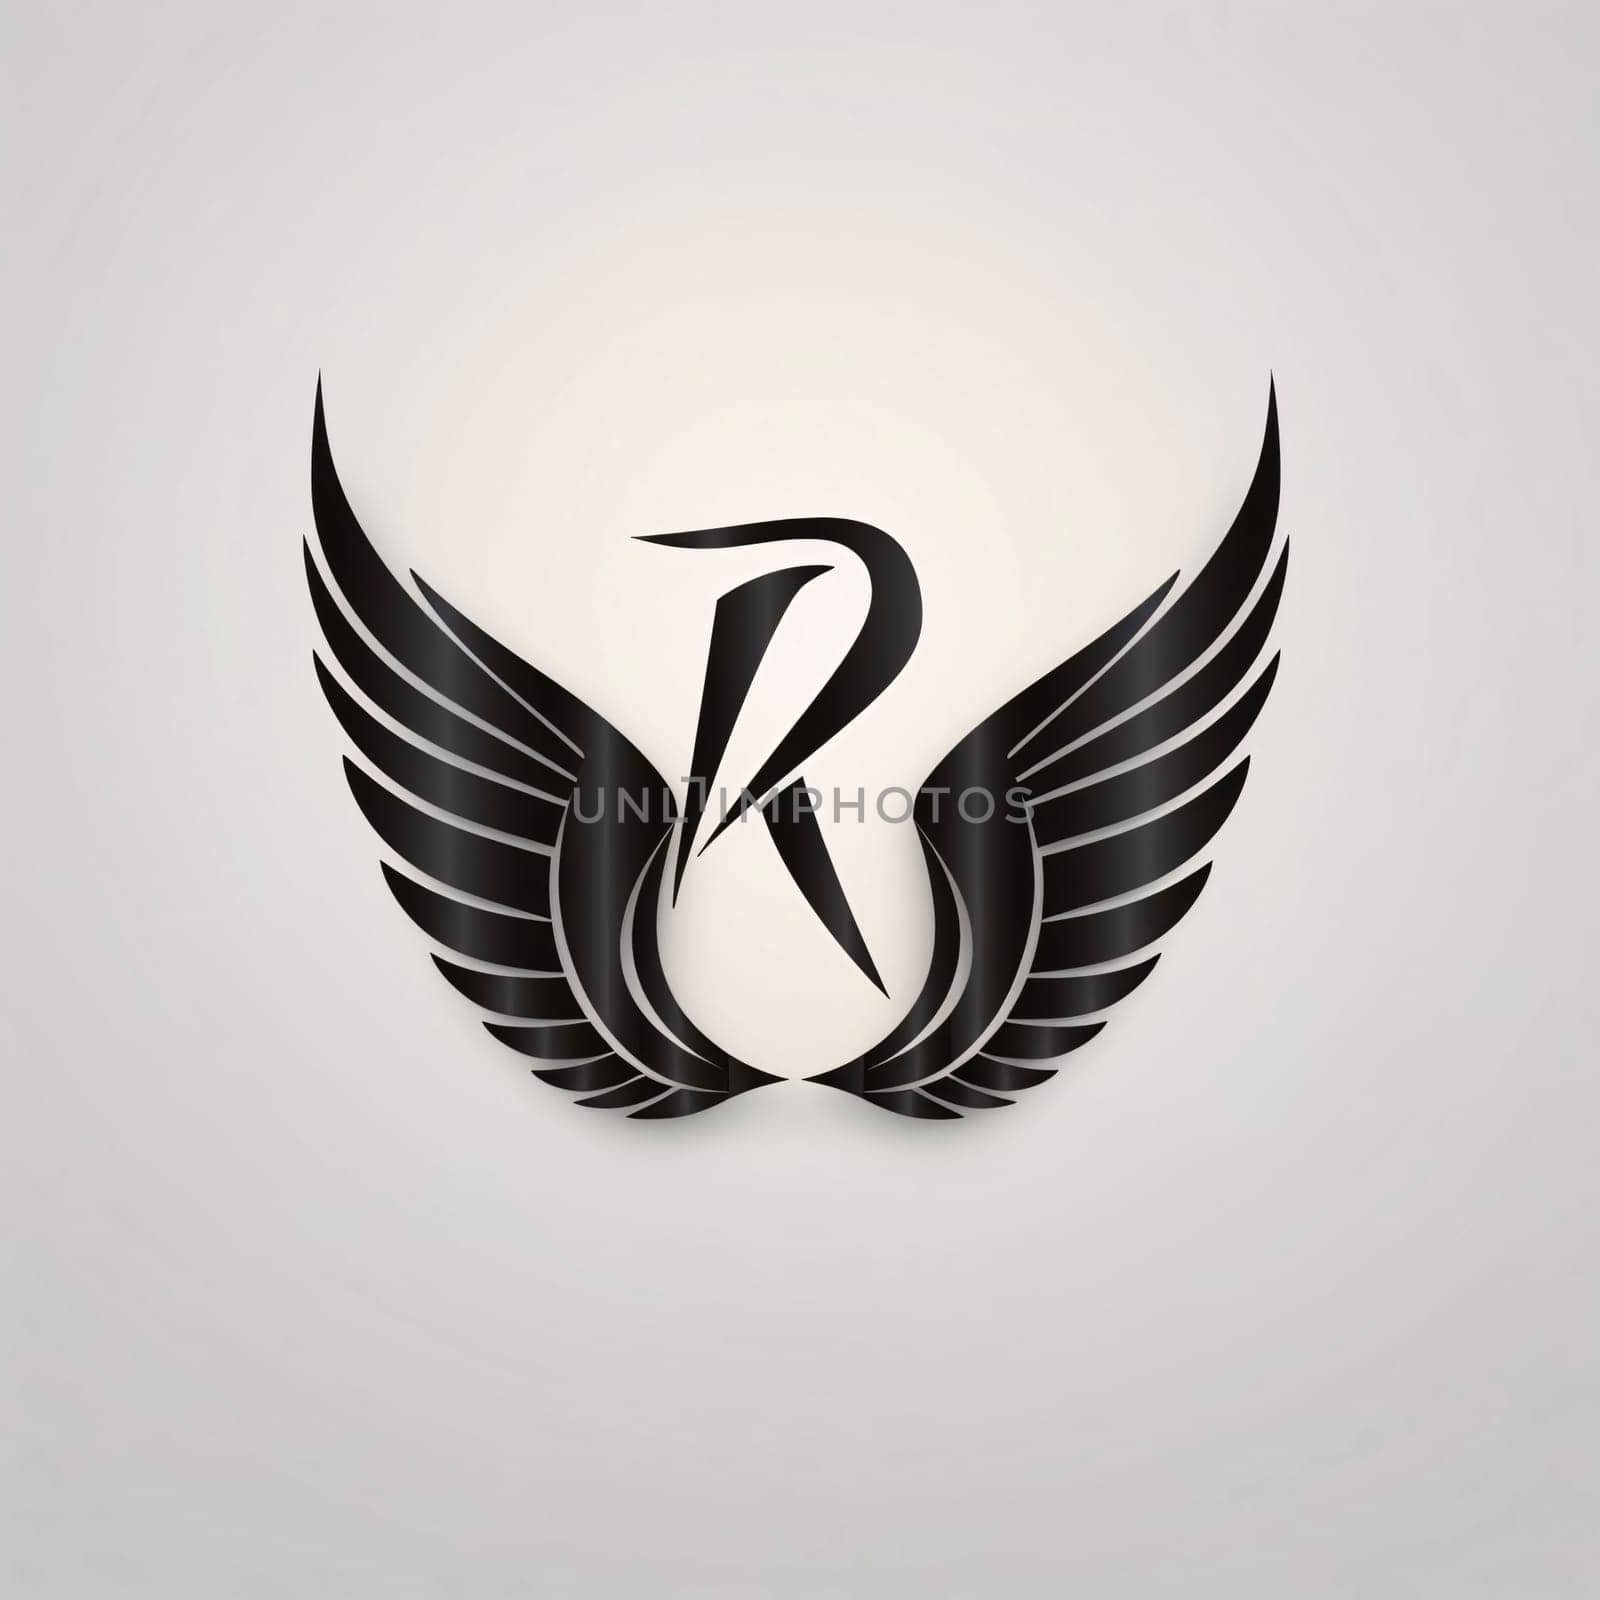 Graphic alphabet letters: Letter R logo with black wings. Design template elements for your application or corporate identity.